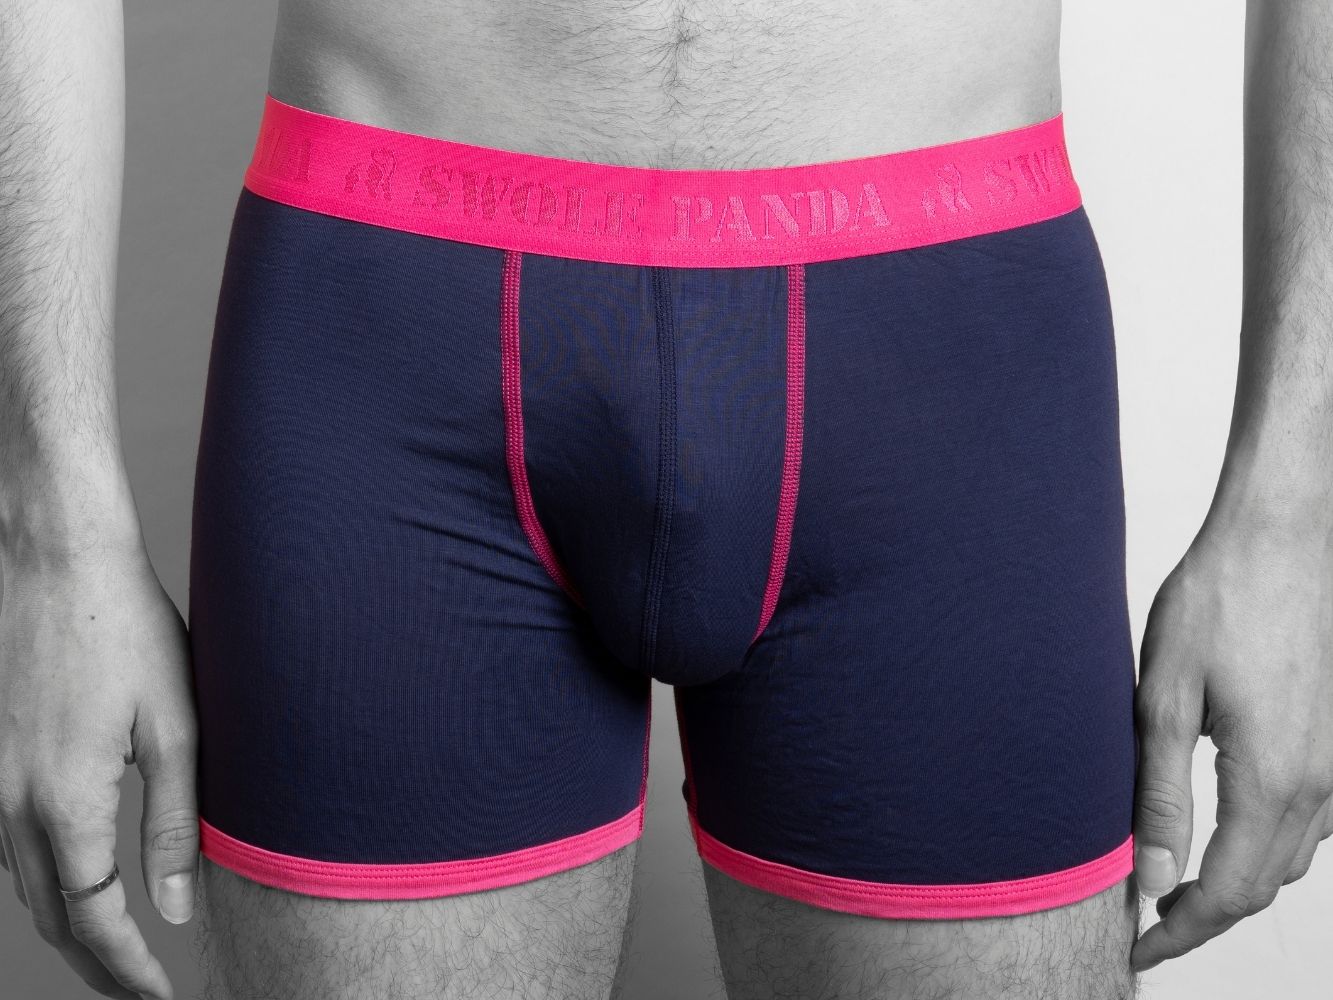 underwear-bamboo-boxers-2-pack-pink-navy-sharks-2_ad1cb24d-5673-41b8-a1f1-24e0c630290c.jpg